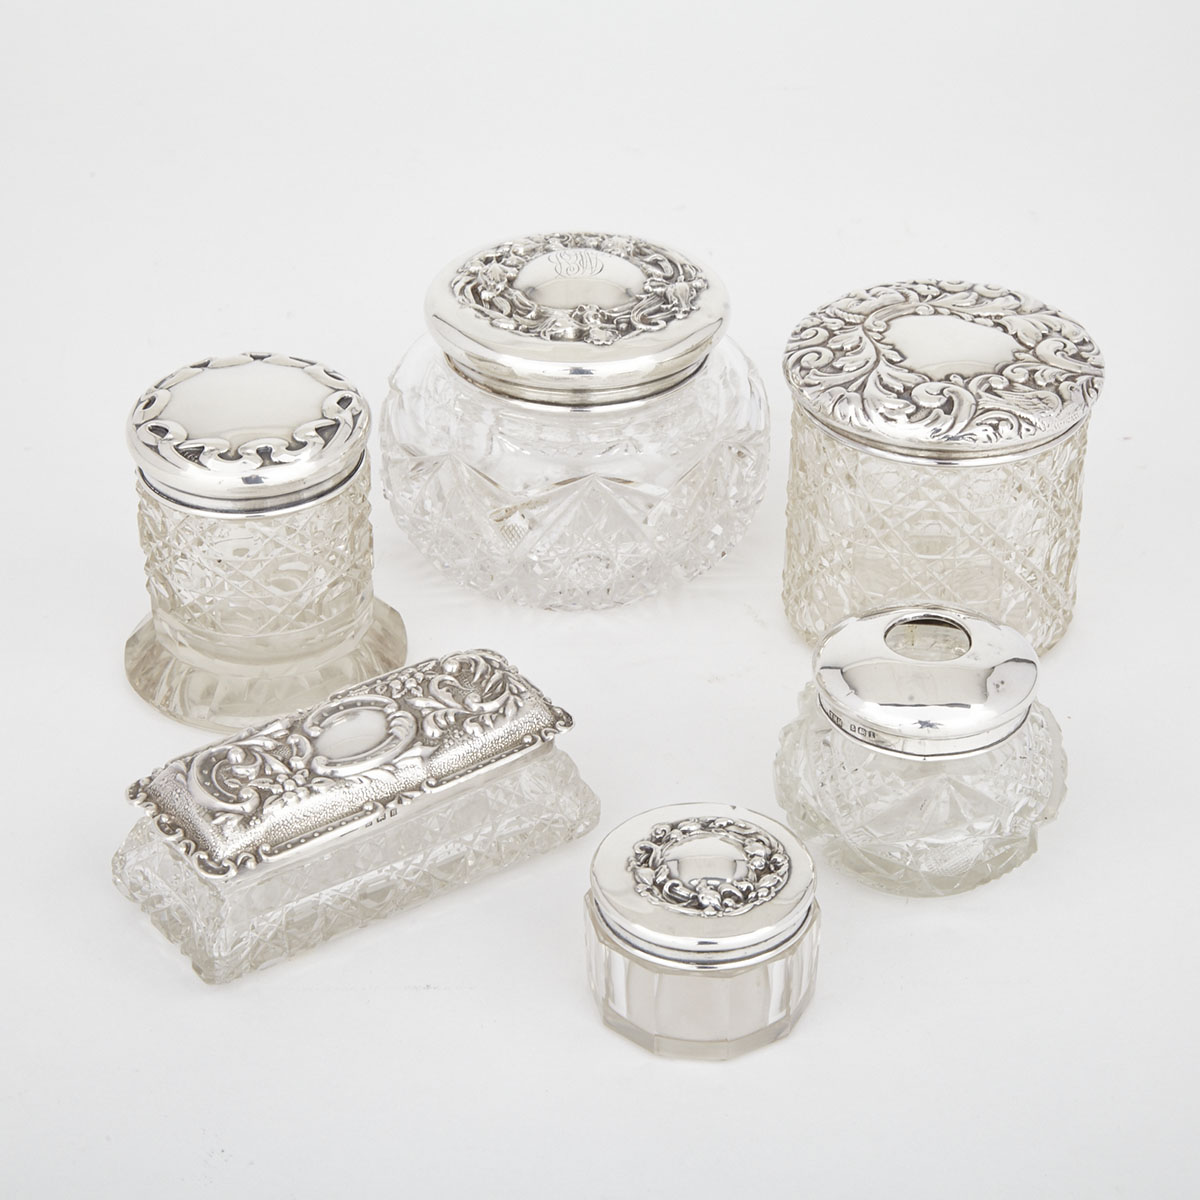 Six English and North American Silver Mounted Cut Glass Dressing Table Jars, late 19th/early 20th century